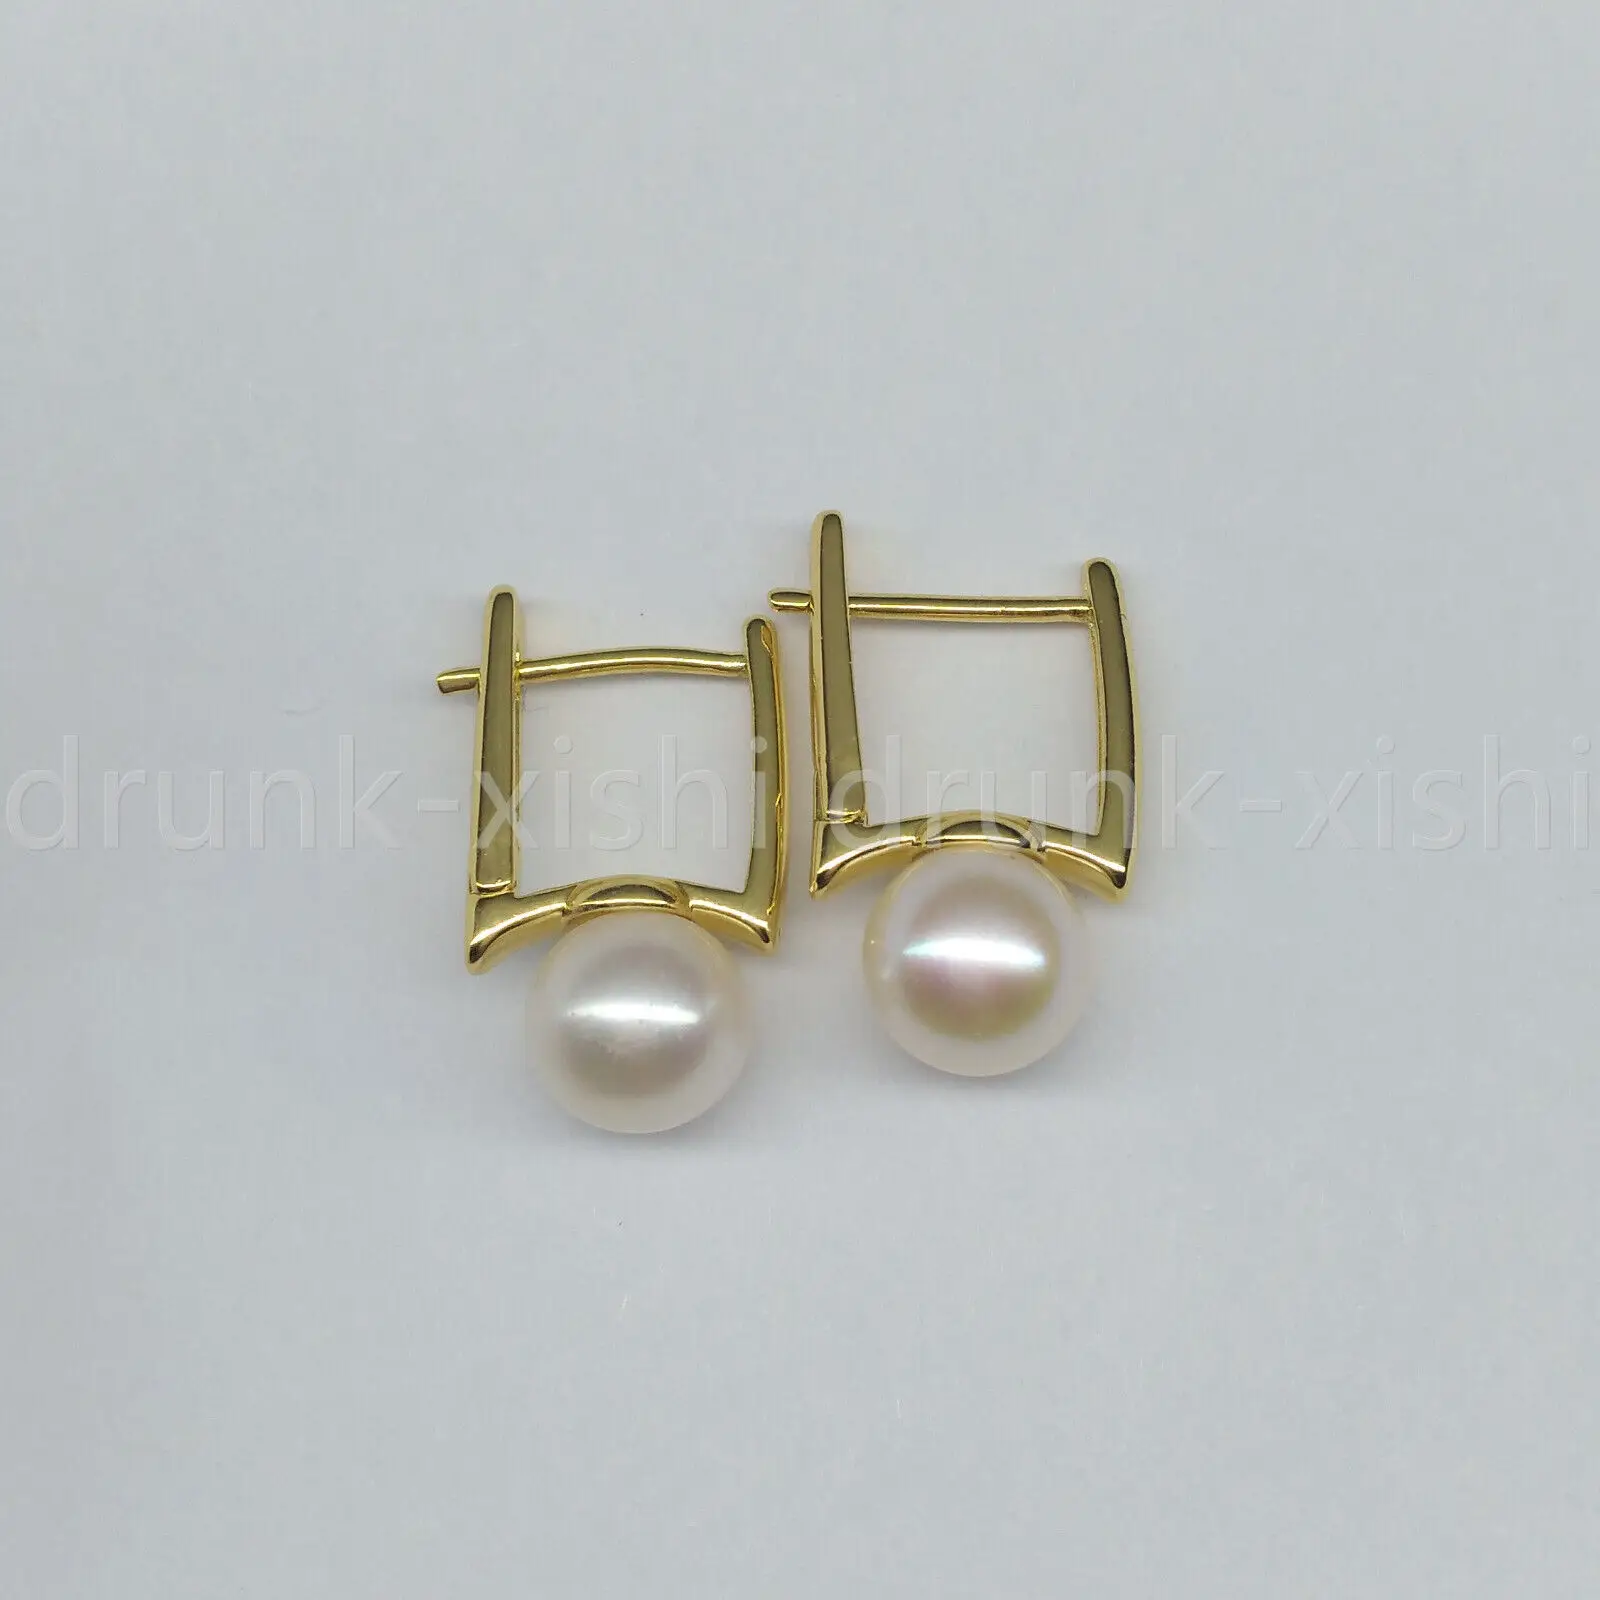 

Charming AAA+ 8-9mm Real Natural South Sea White Perfectly Round Real Pearl Earrings Filled 14k Gold Free Shipping